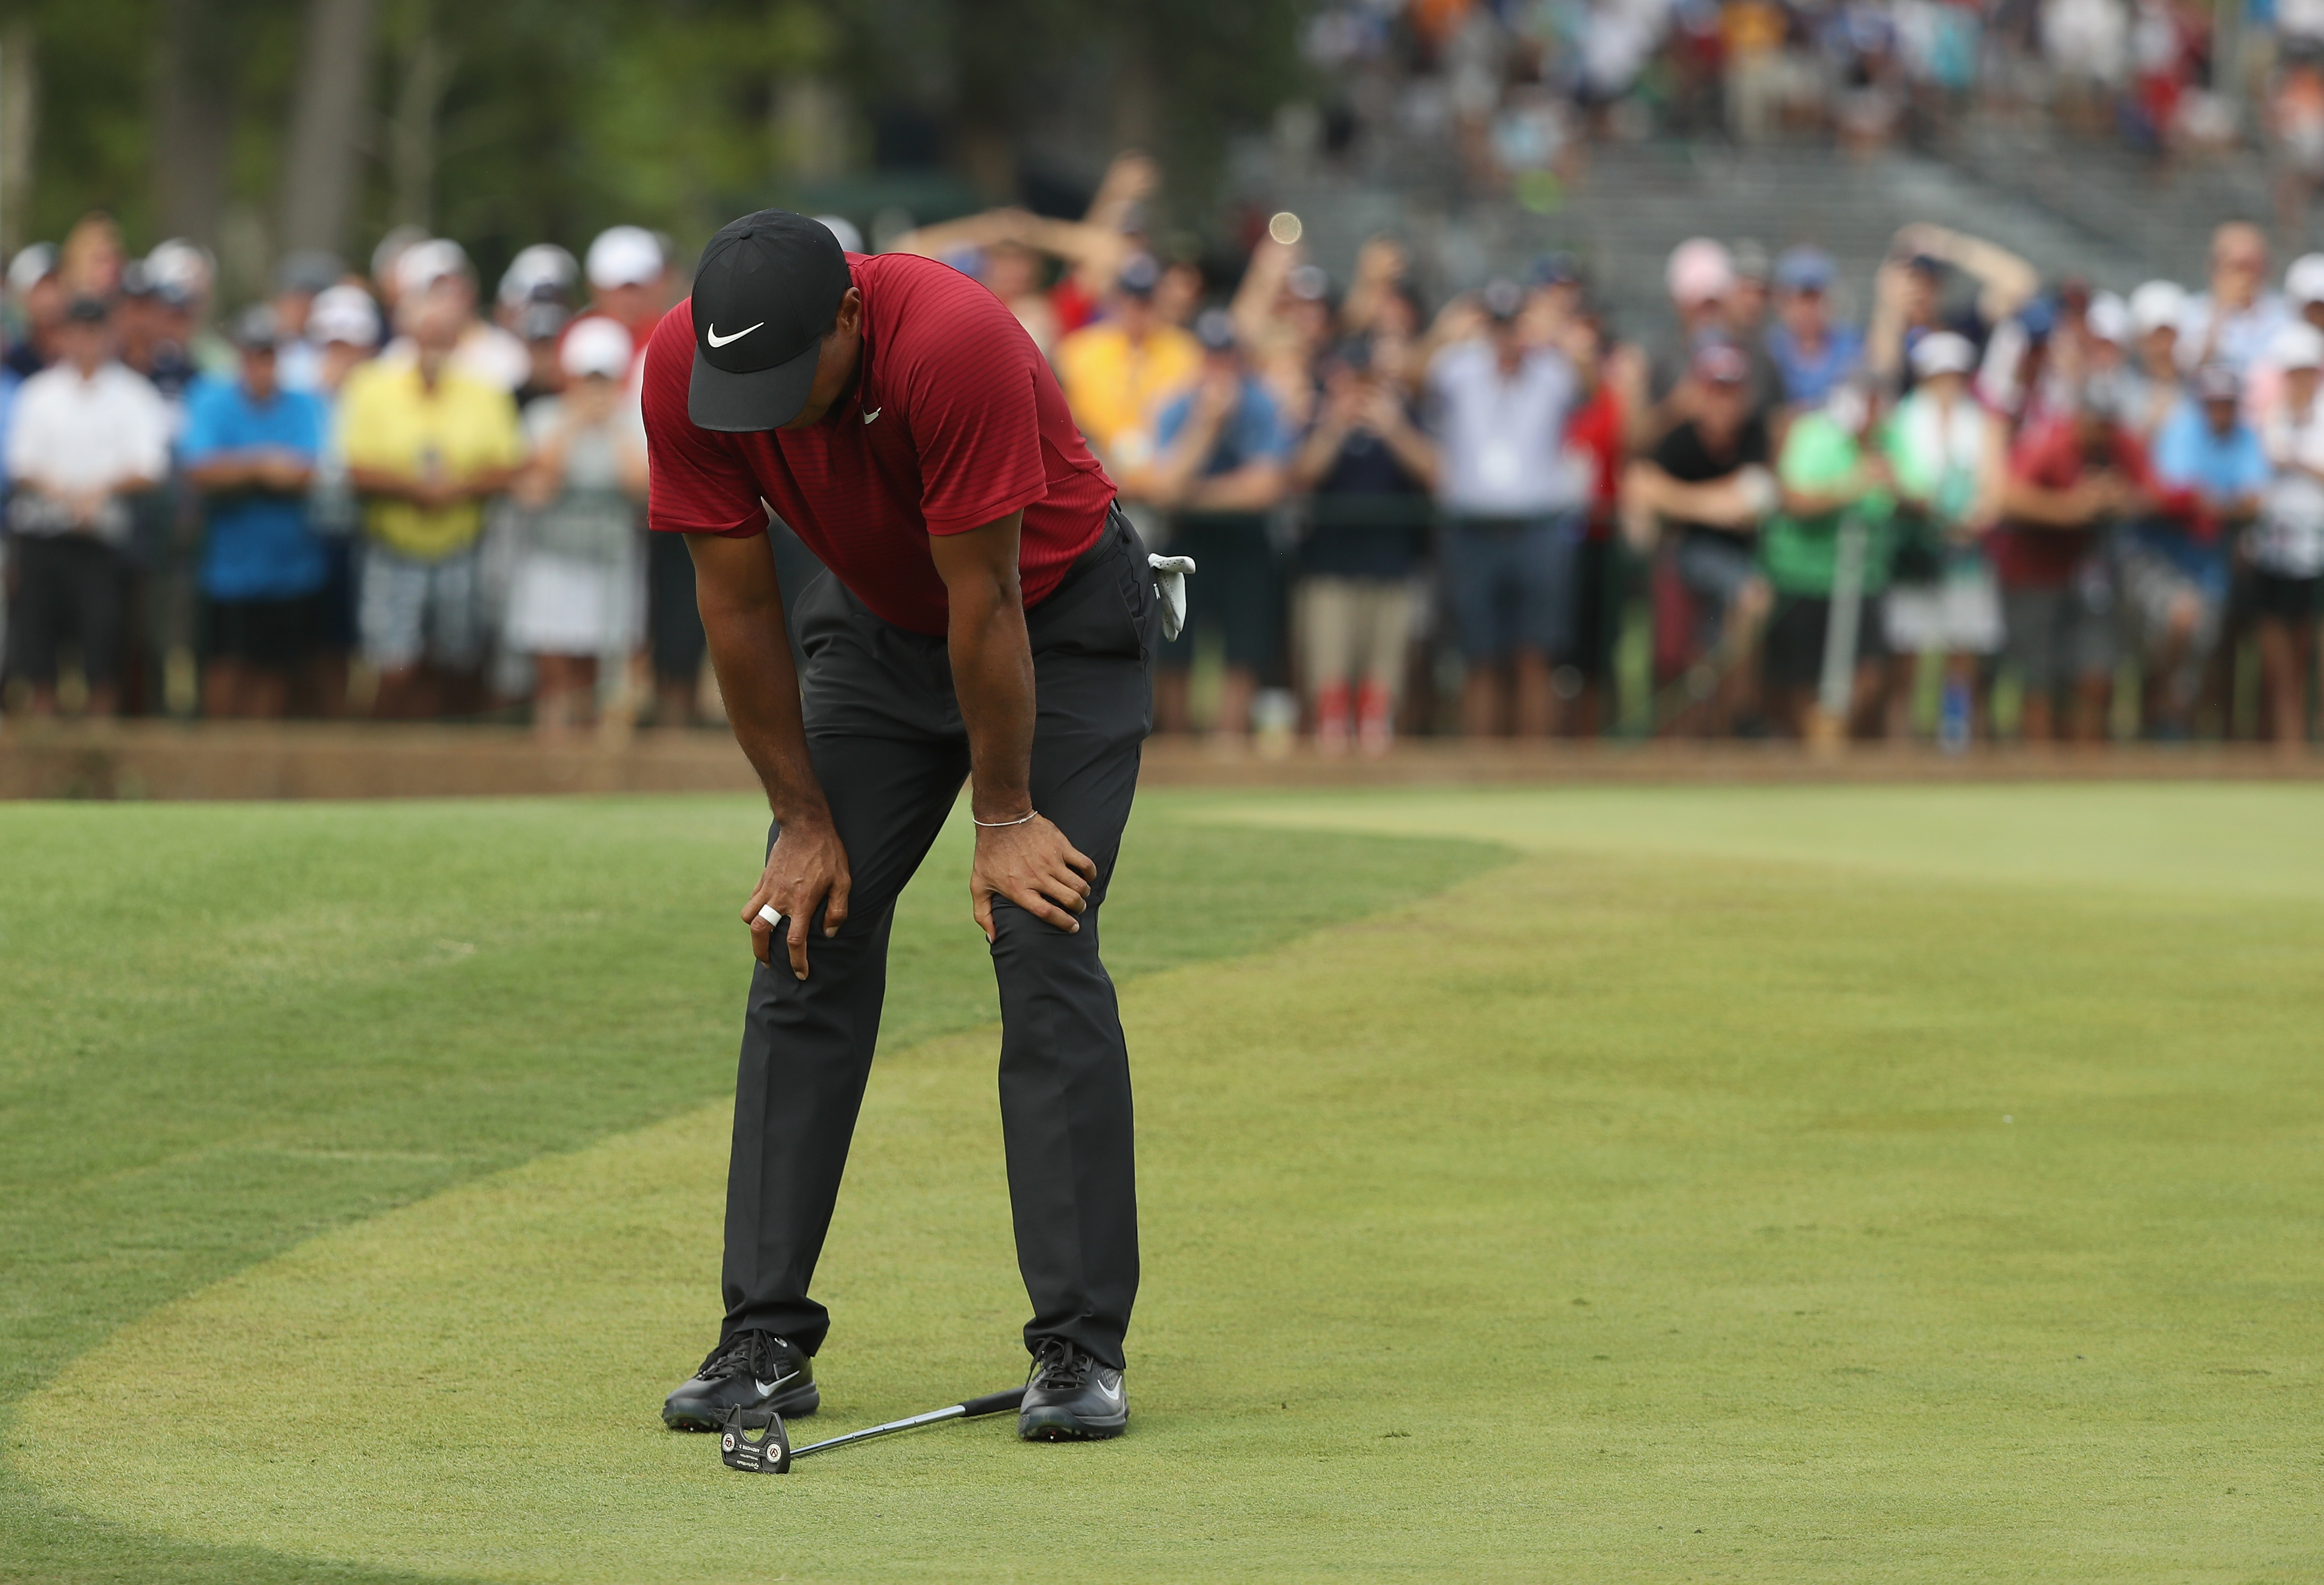 Pga Championship 2018 Tiger Woods Remarkable Final Round In Pictures Golf News And Tour Information Golf Digest